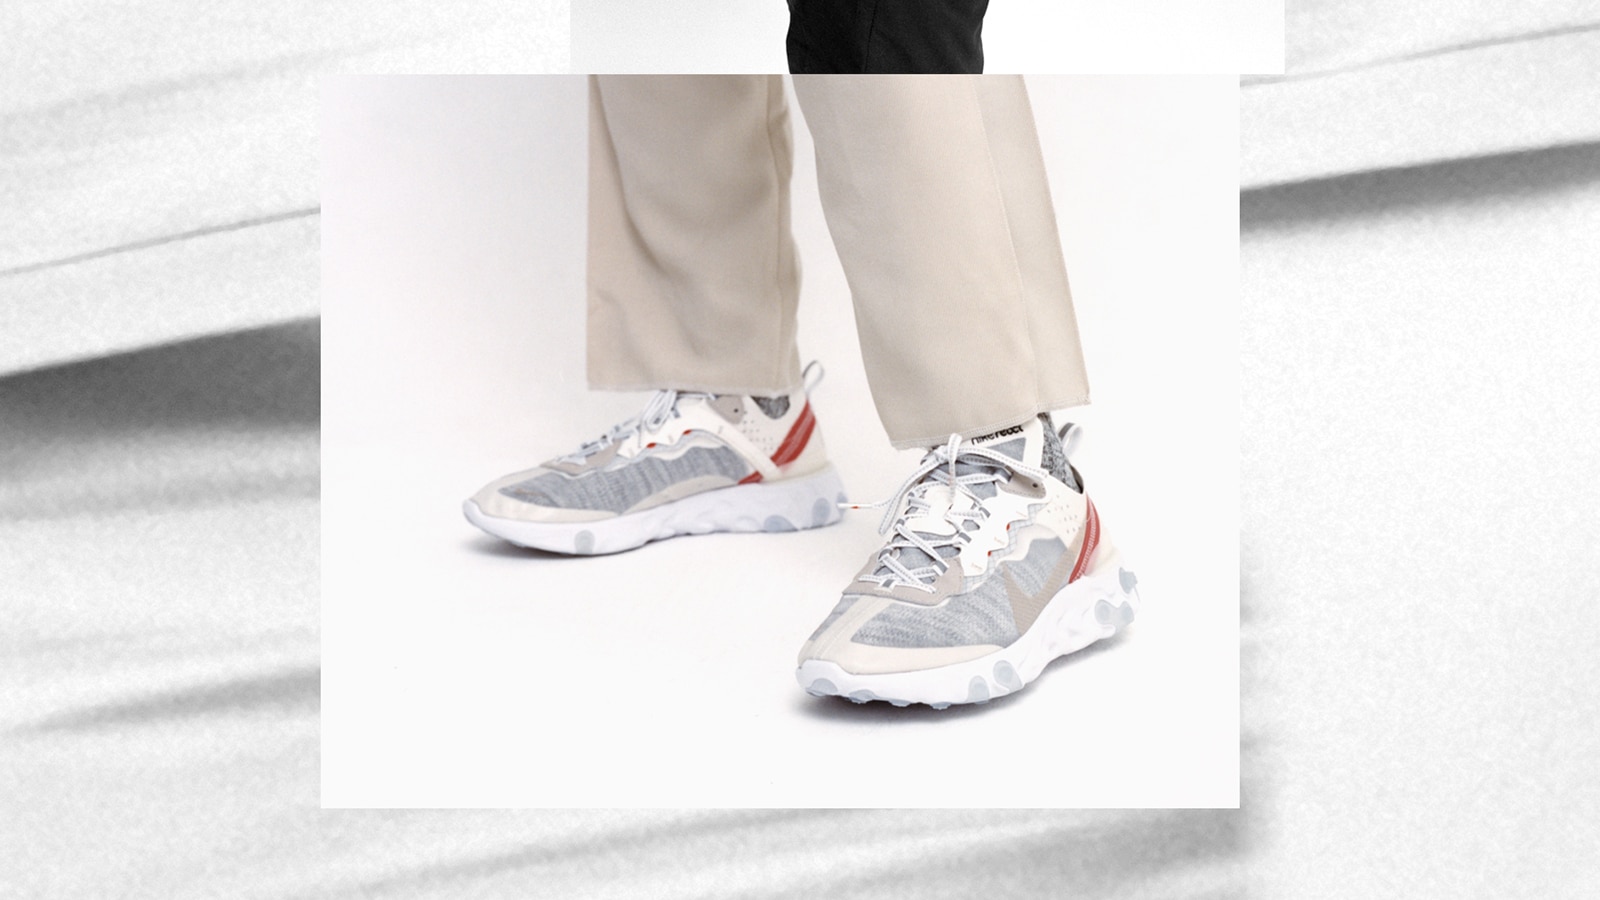 Coming Soon: The Nike React Element 87 | The Journal | MR PORTER